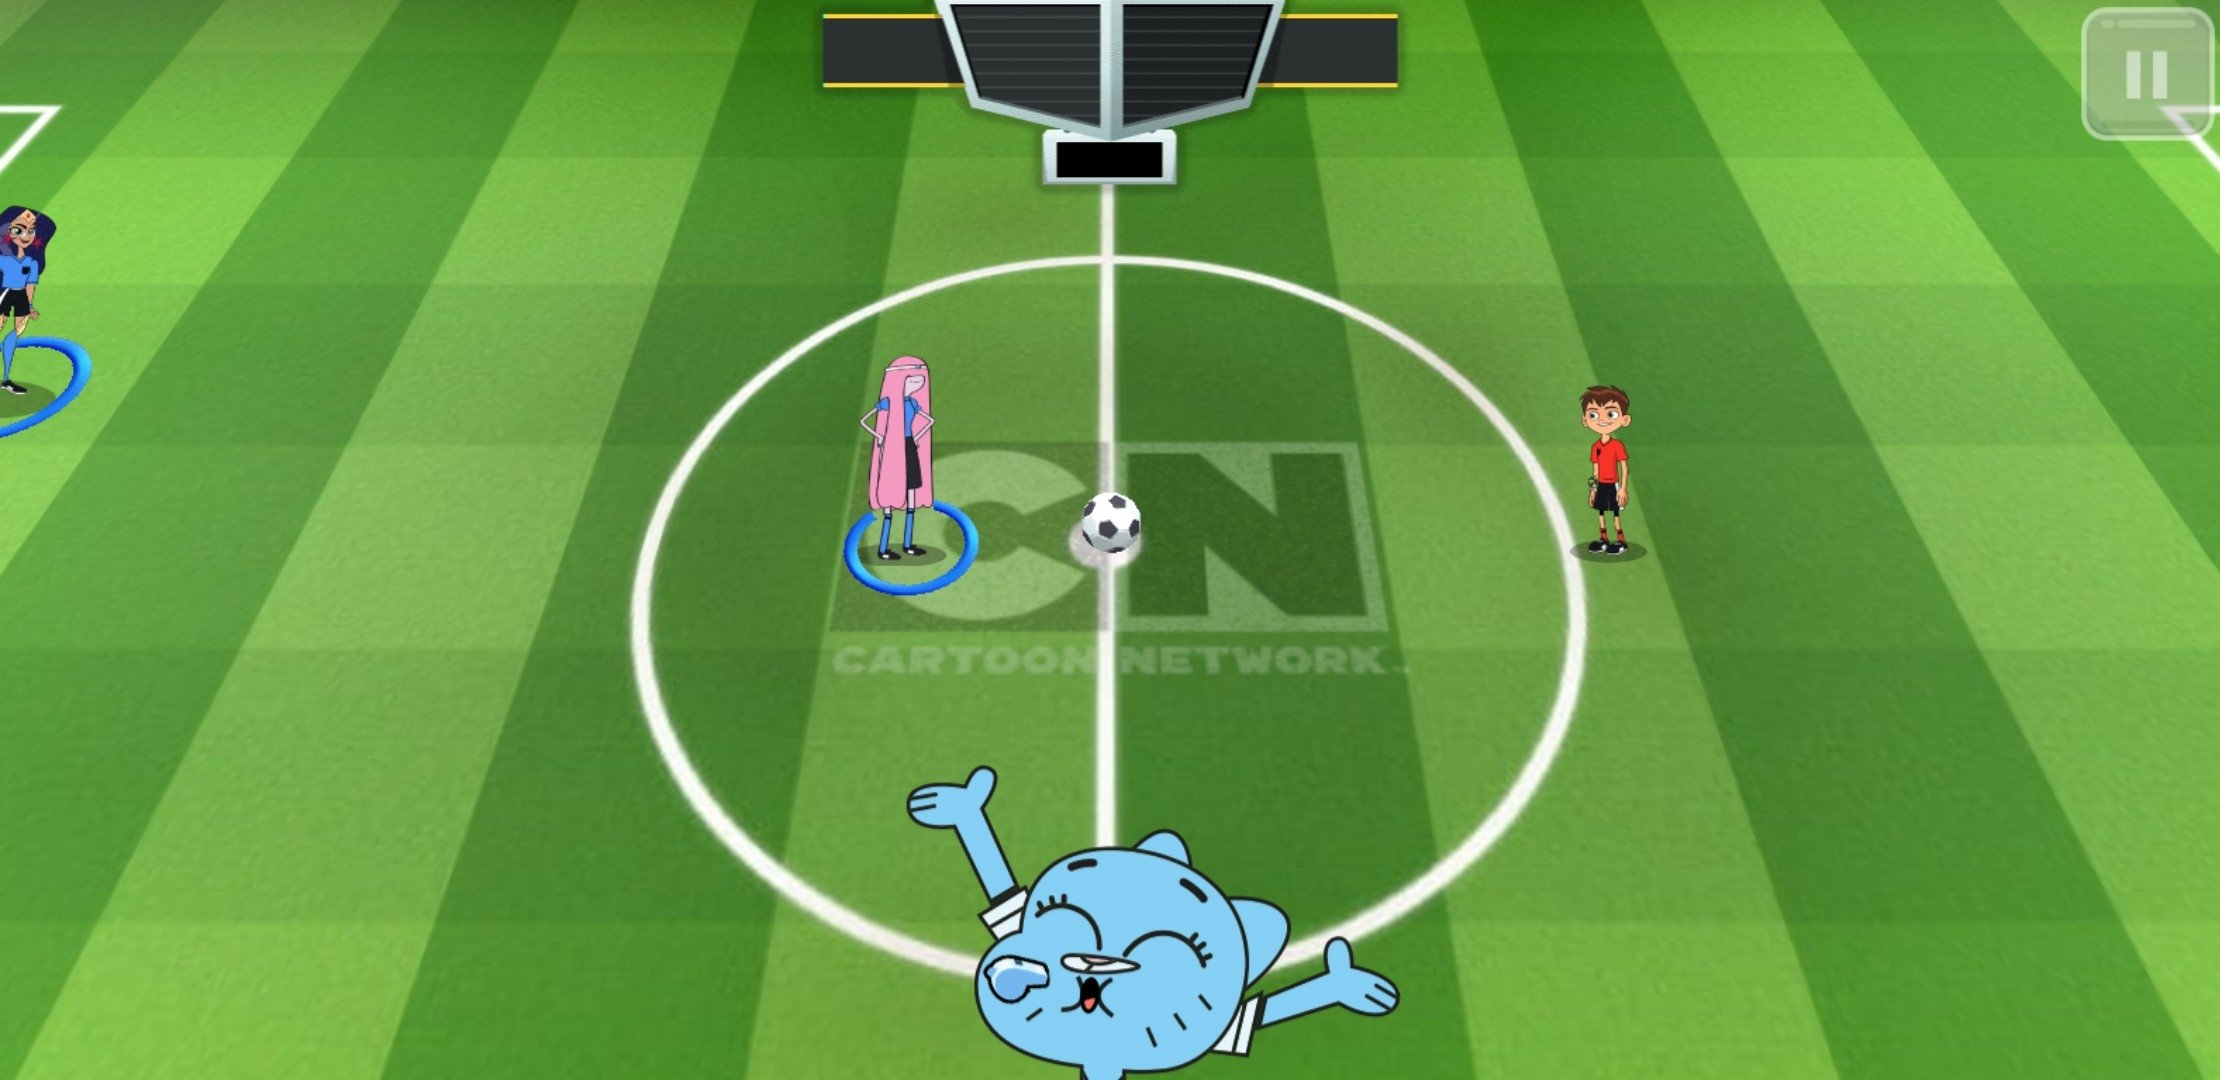 Toon Cup 2018 - Football Game Tips, Cheats, Vidoes and Strategies